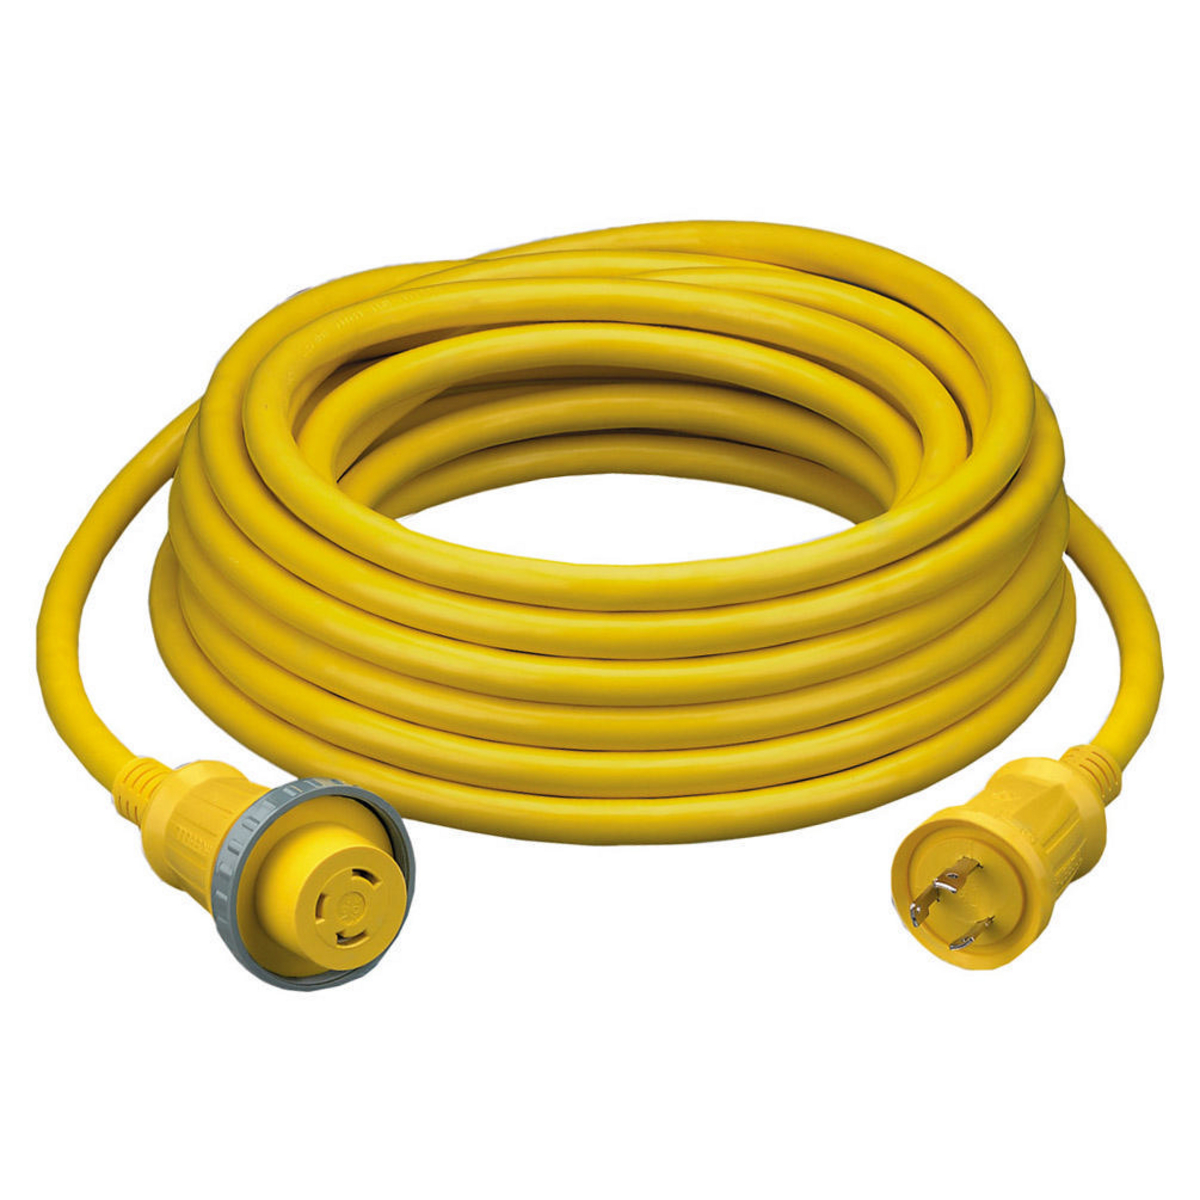 Locking Devices, Twist-Lock®, Marine Grade, Ship to Shore Cableset, 30A 125V,  2-Pole 3-Wire Grounding, L5-30, Yellow, HBL61CM05